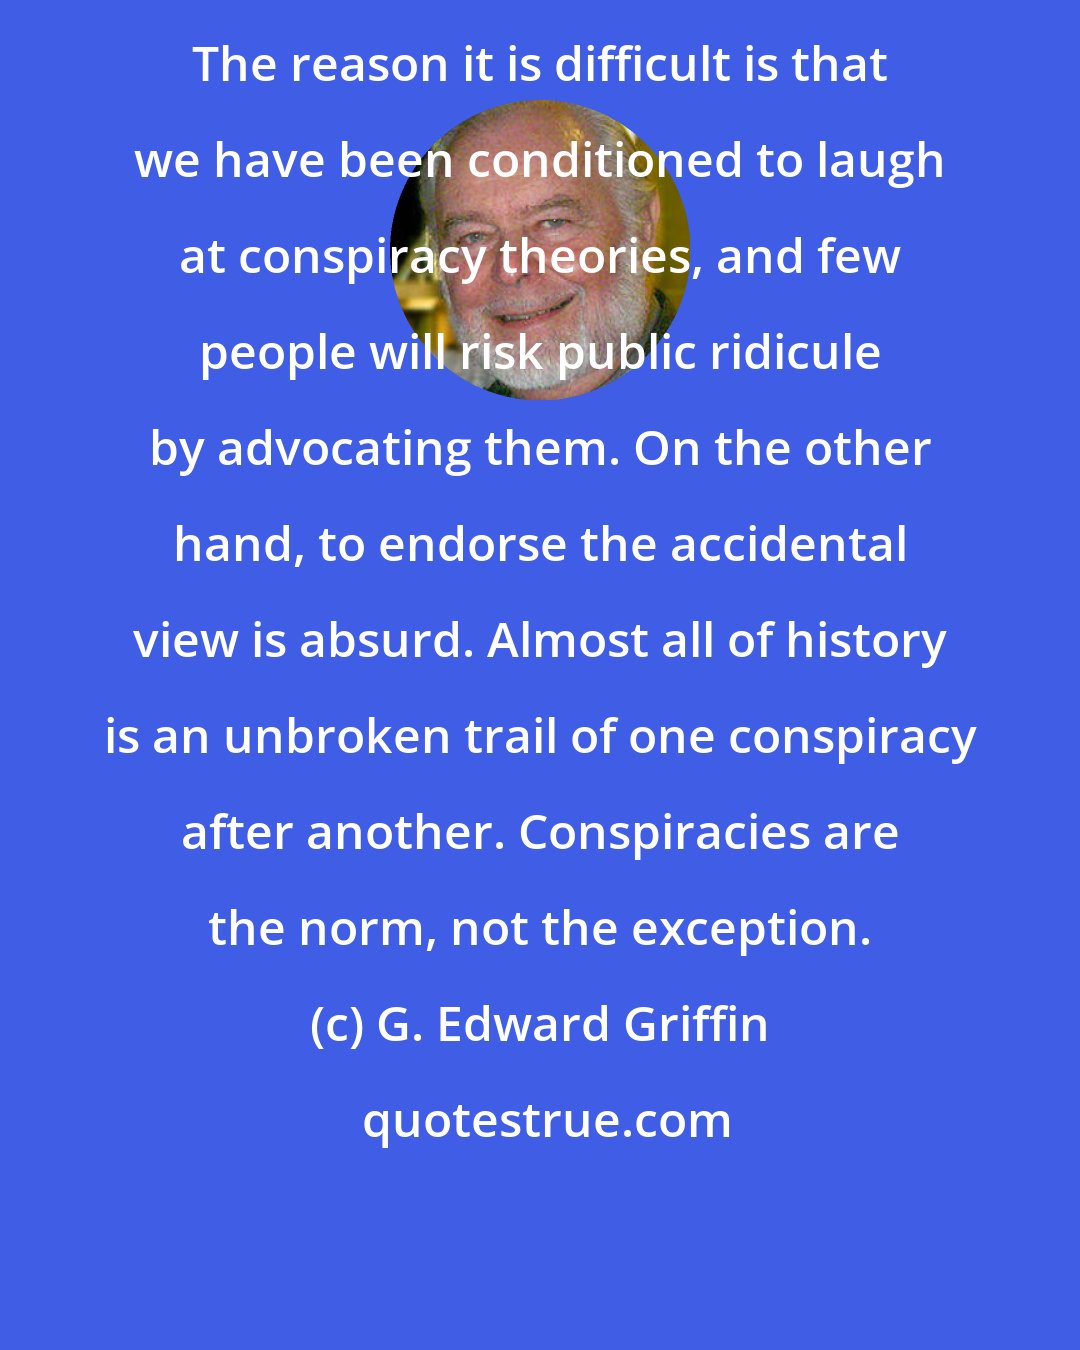 G. Edward Griffin: The reason it is difficult is that we have been conditioned to laugh at conspiracy theories, and few people will risk public ridicule by advocating them. On the other hand, to endorse the accidental view is absurd. Almost all of history is an unbroken trail of one conspiracy after another. Conspiracies are the norm, not the exception.